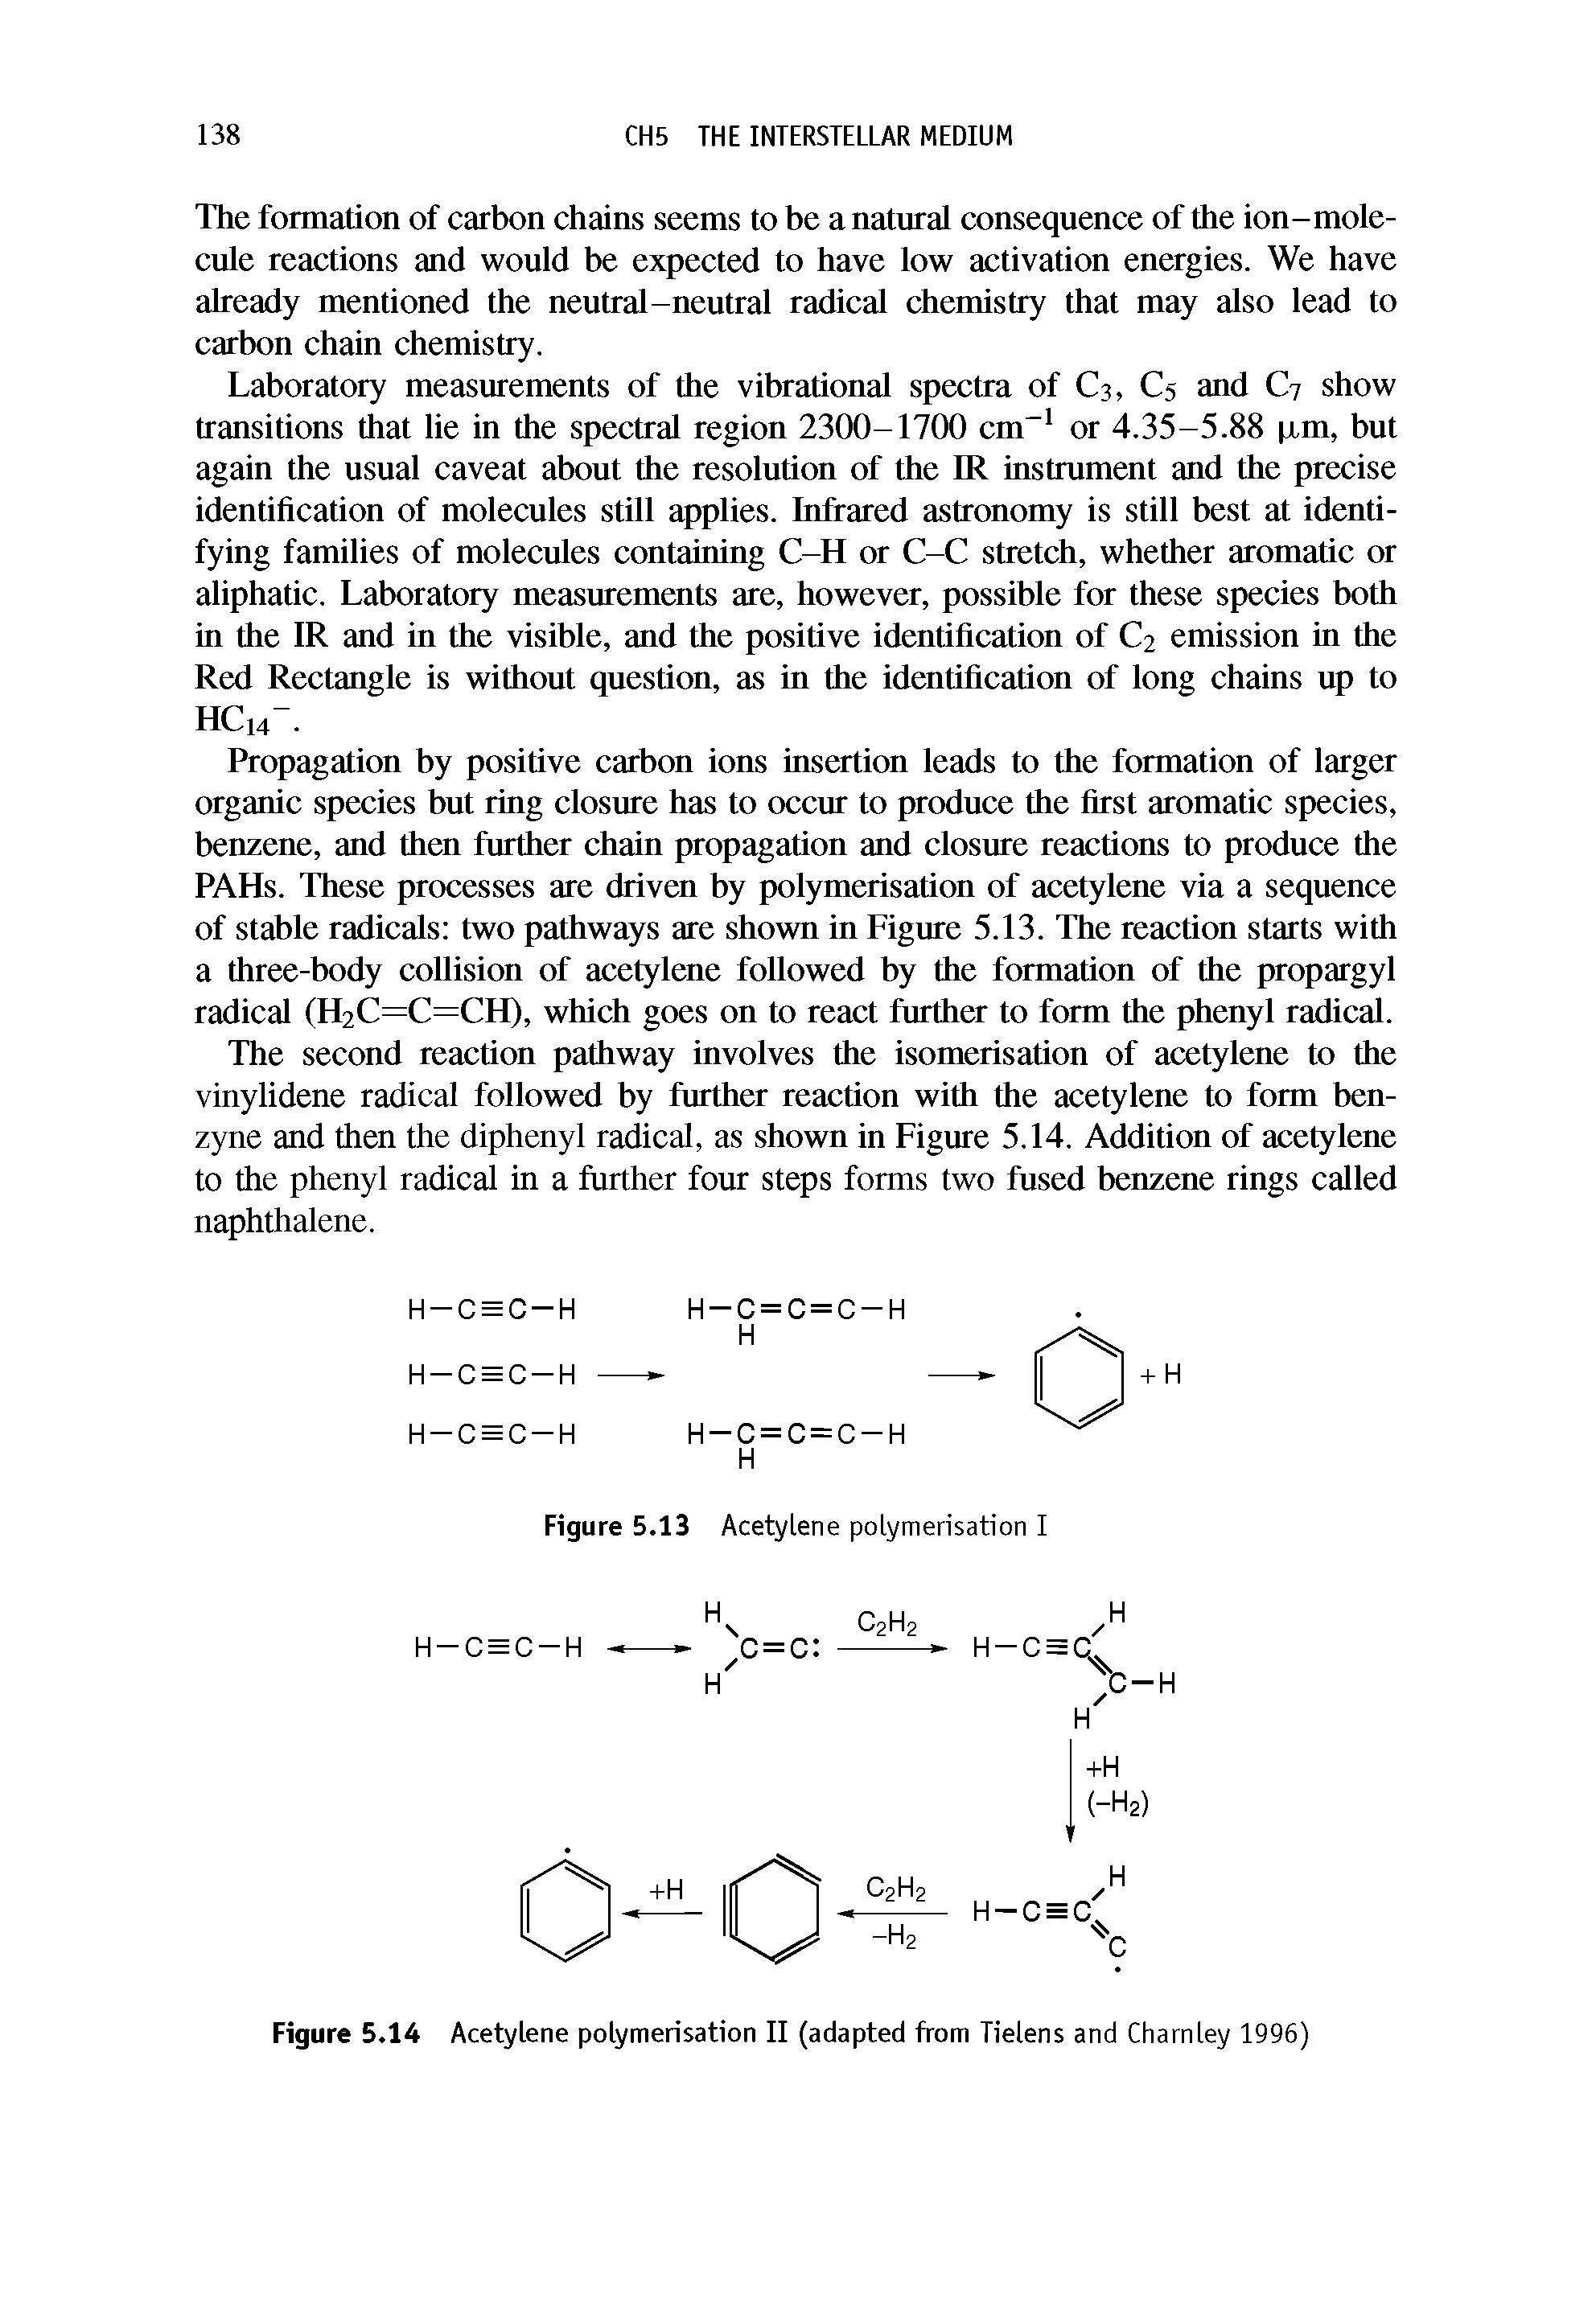 Figure 5.14 Acetylene polymerisation II (adapted from Helens and Charnley 1996)...